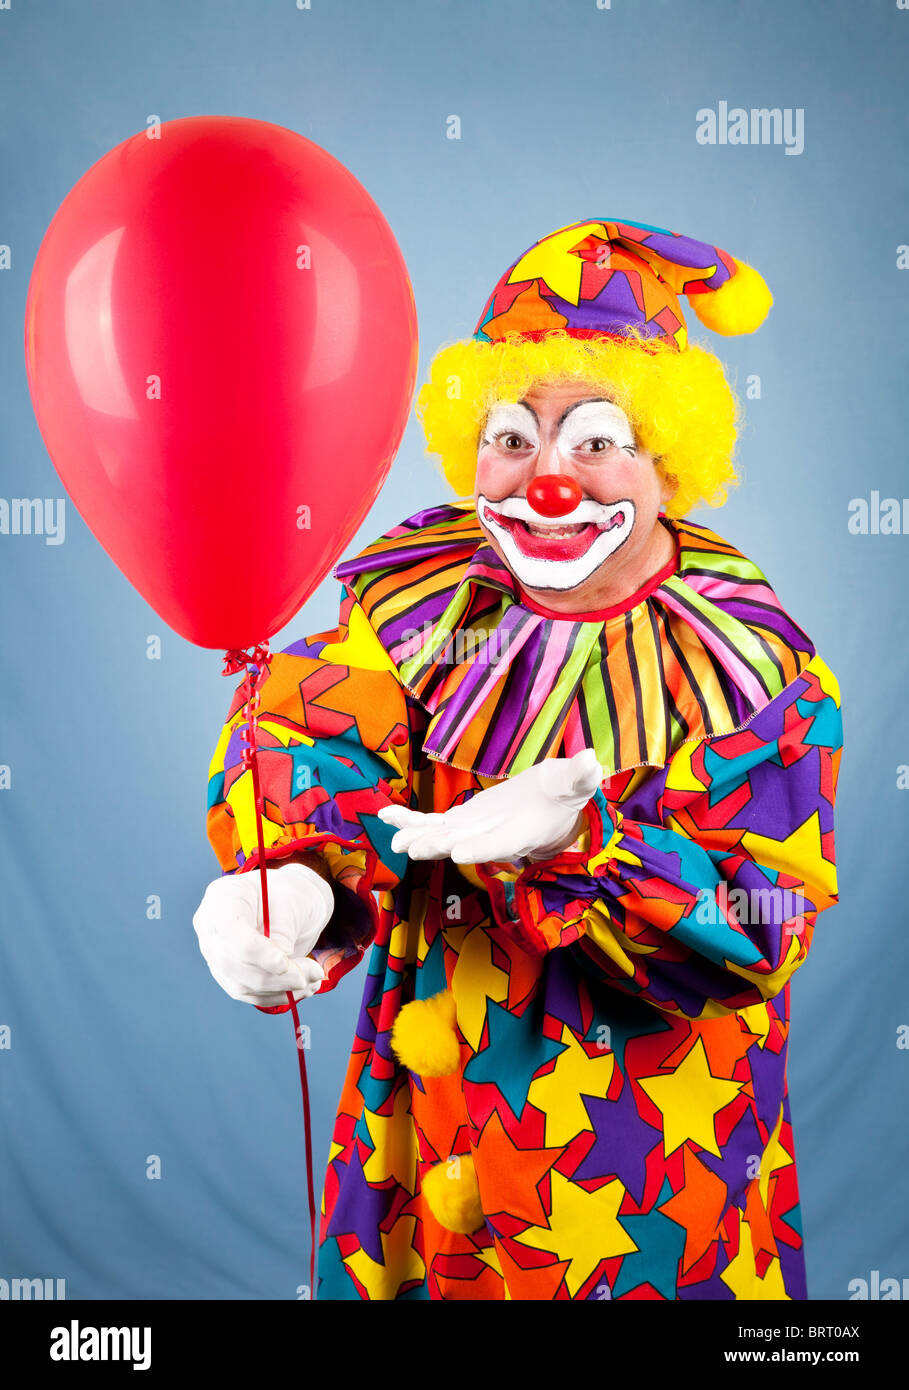 Happy birthday clown holding out a red balloon for you Stock Photo - Alamy